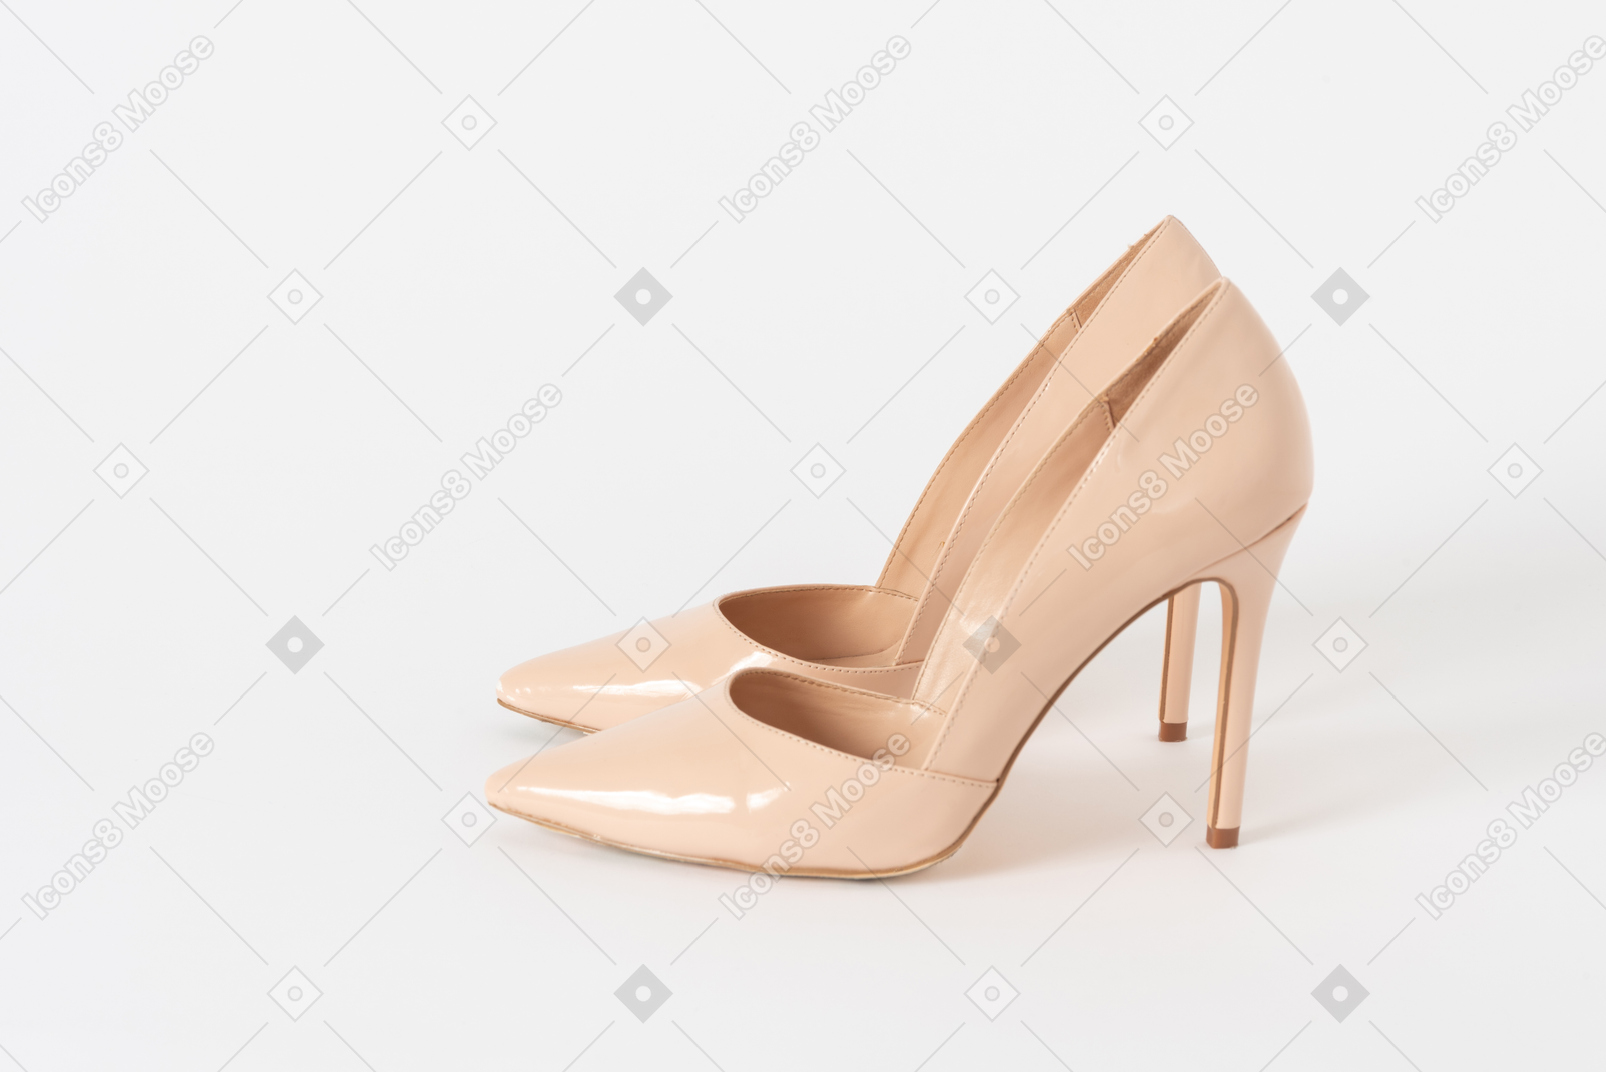 A side shot of a pair of beige lacquered stiletto shoes